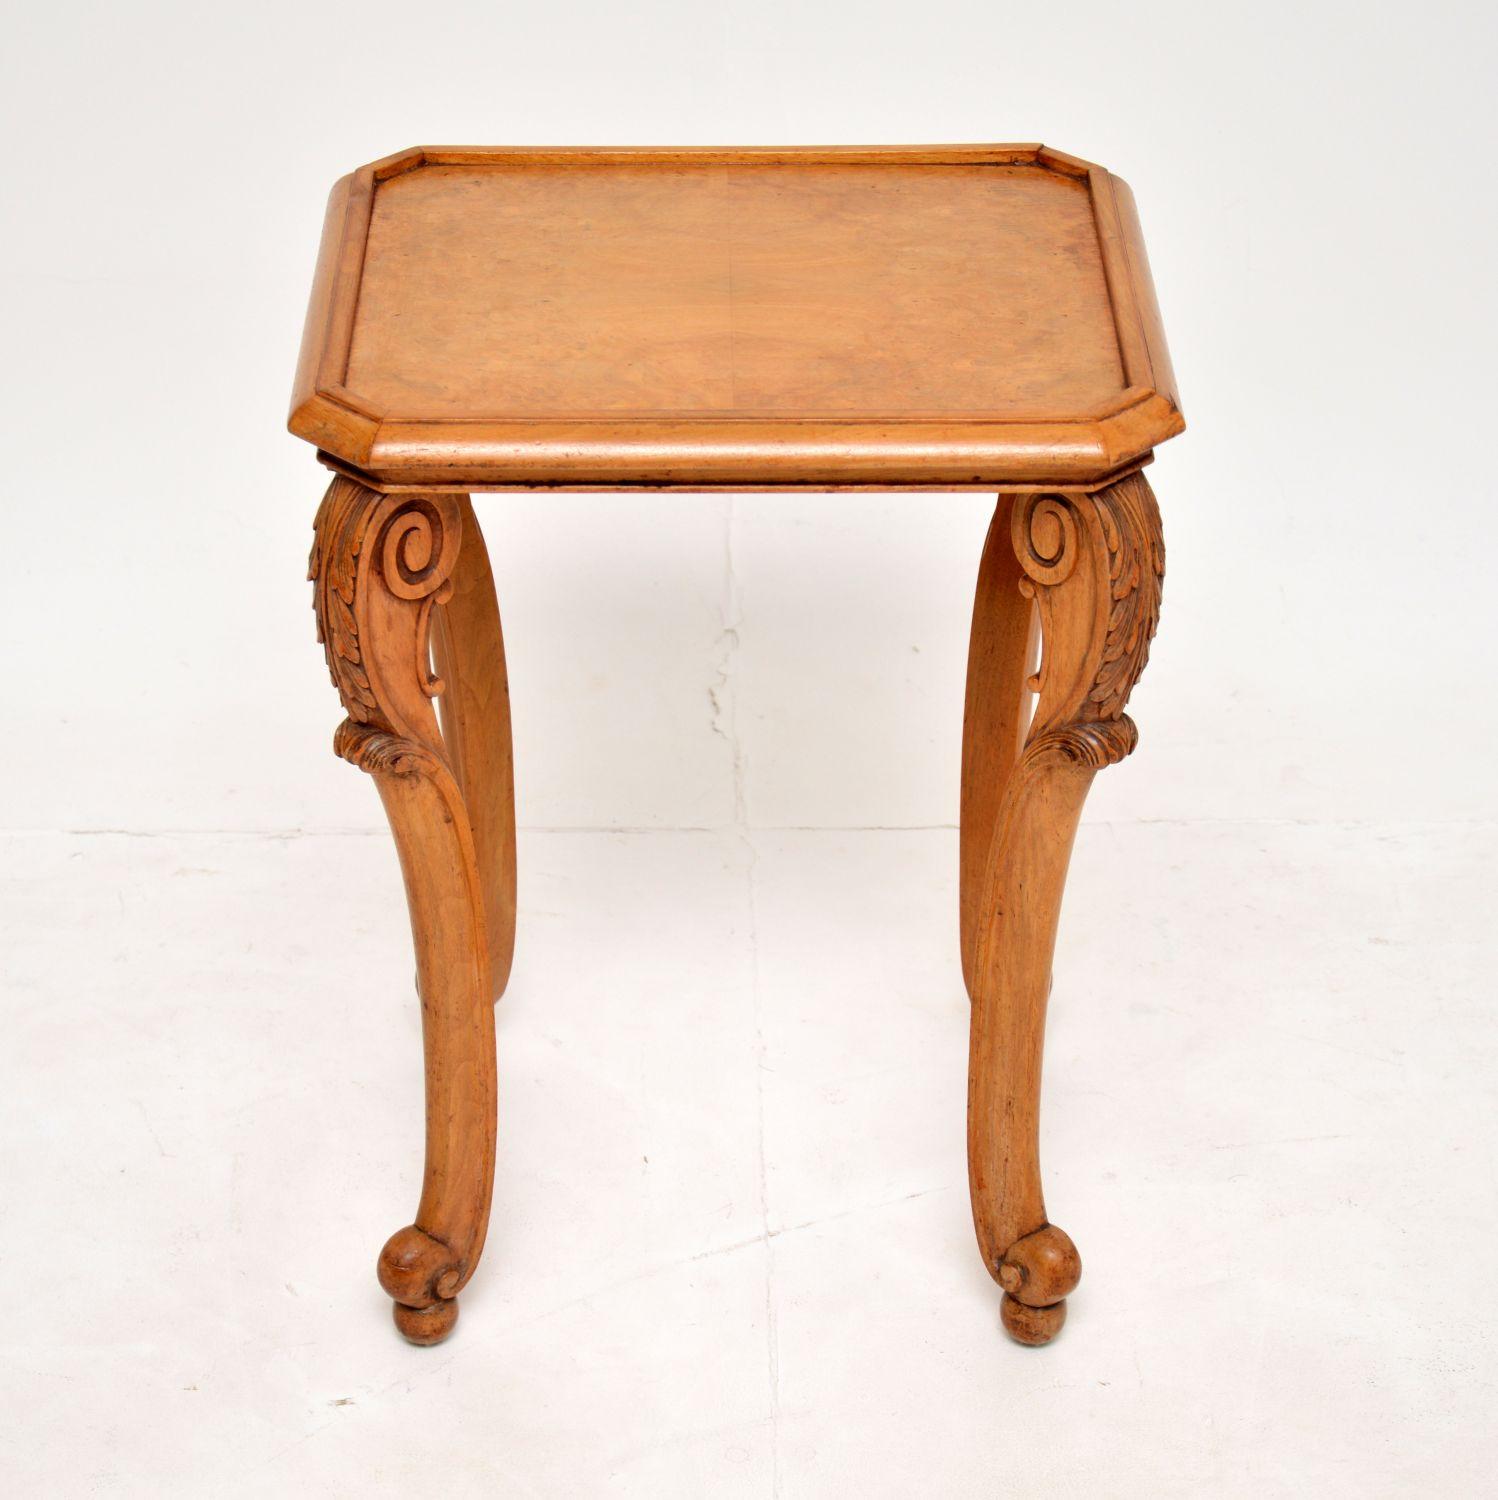 A lovely small antique side table in burr walnut and carved walnut. This was made in England by Ray and Solomon Hille, it dates from the 1930’s.

It is beautifully made and is a useful size for use as an occasional side table or lamp table. There